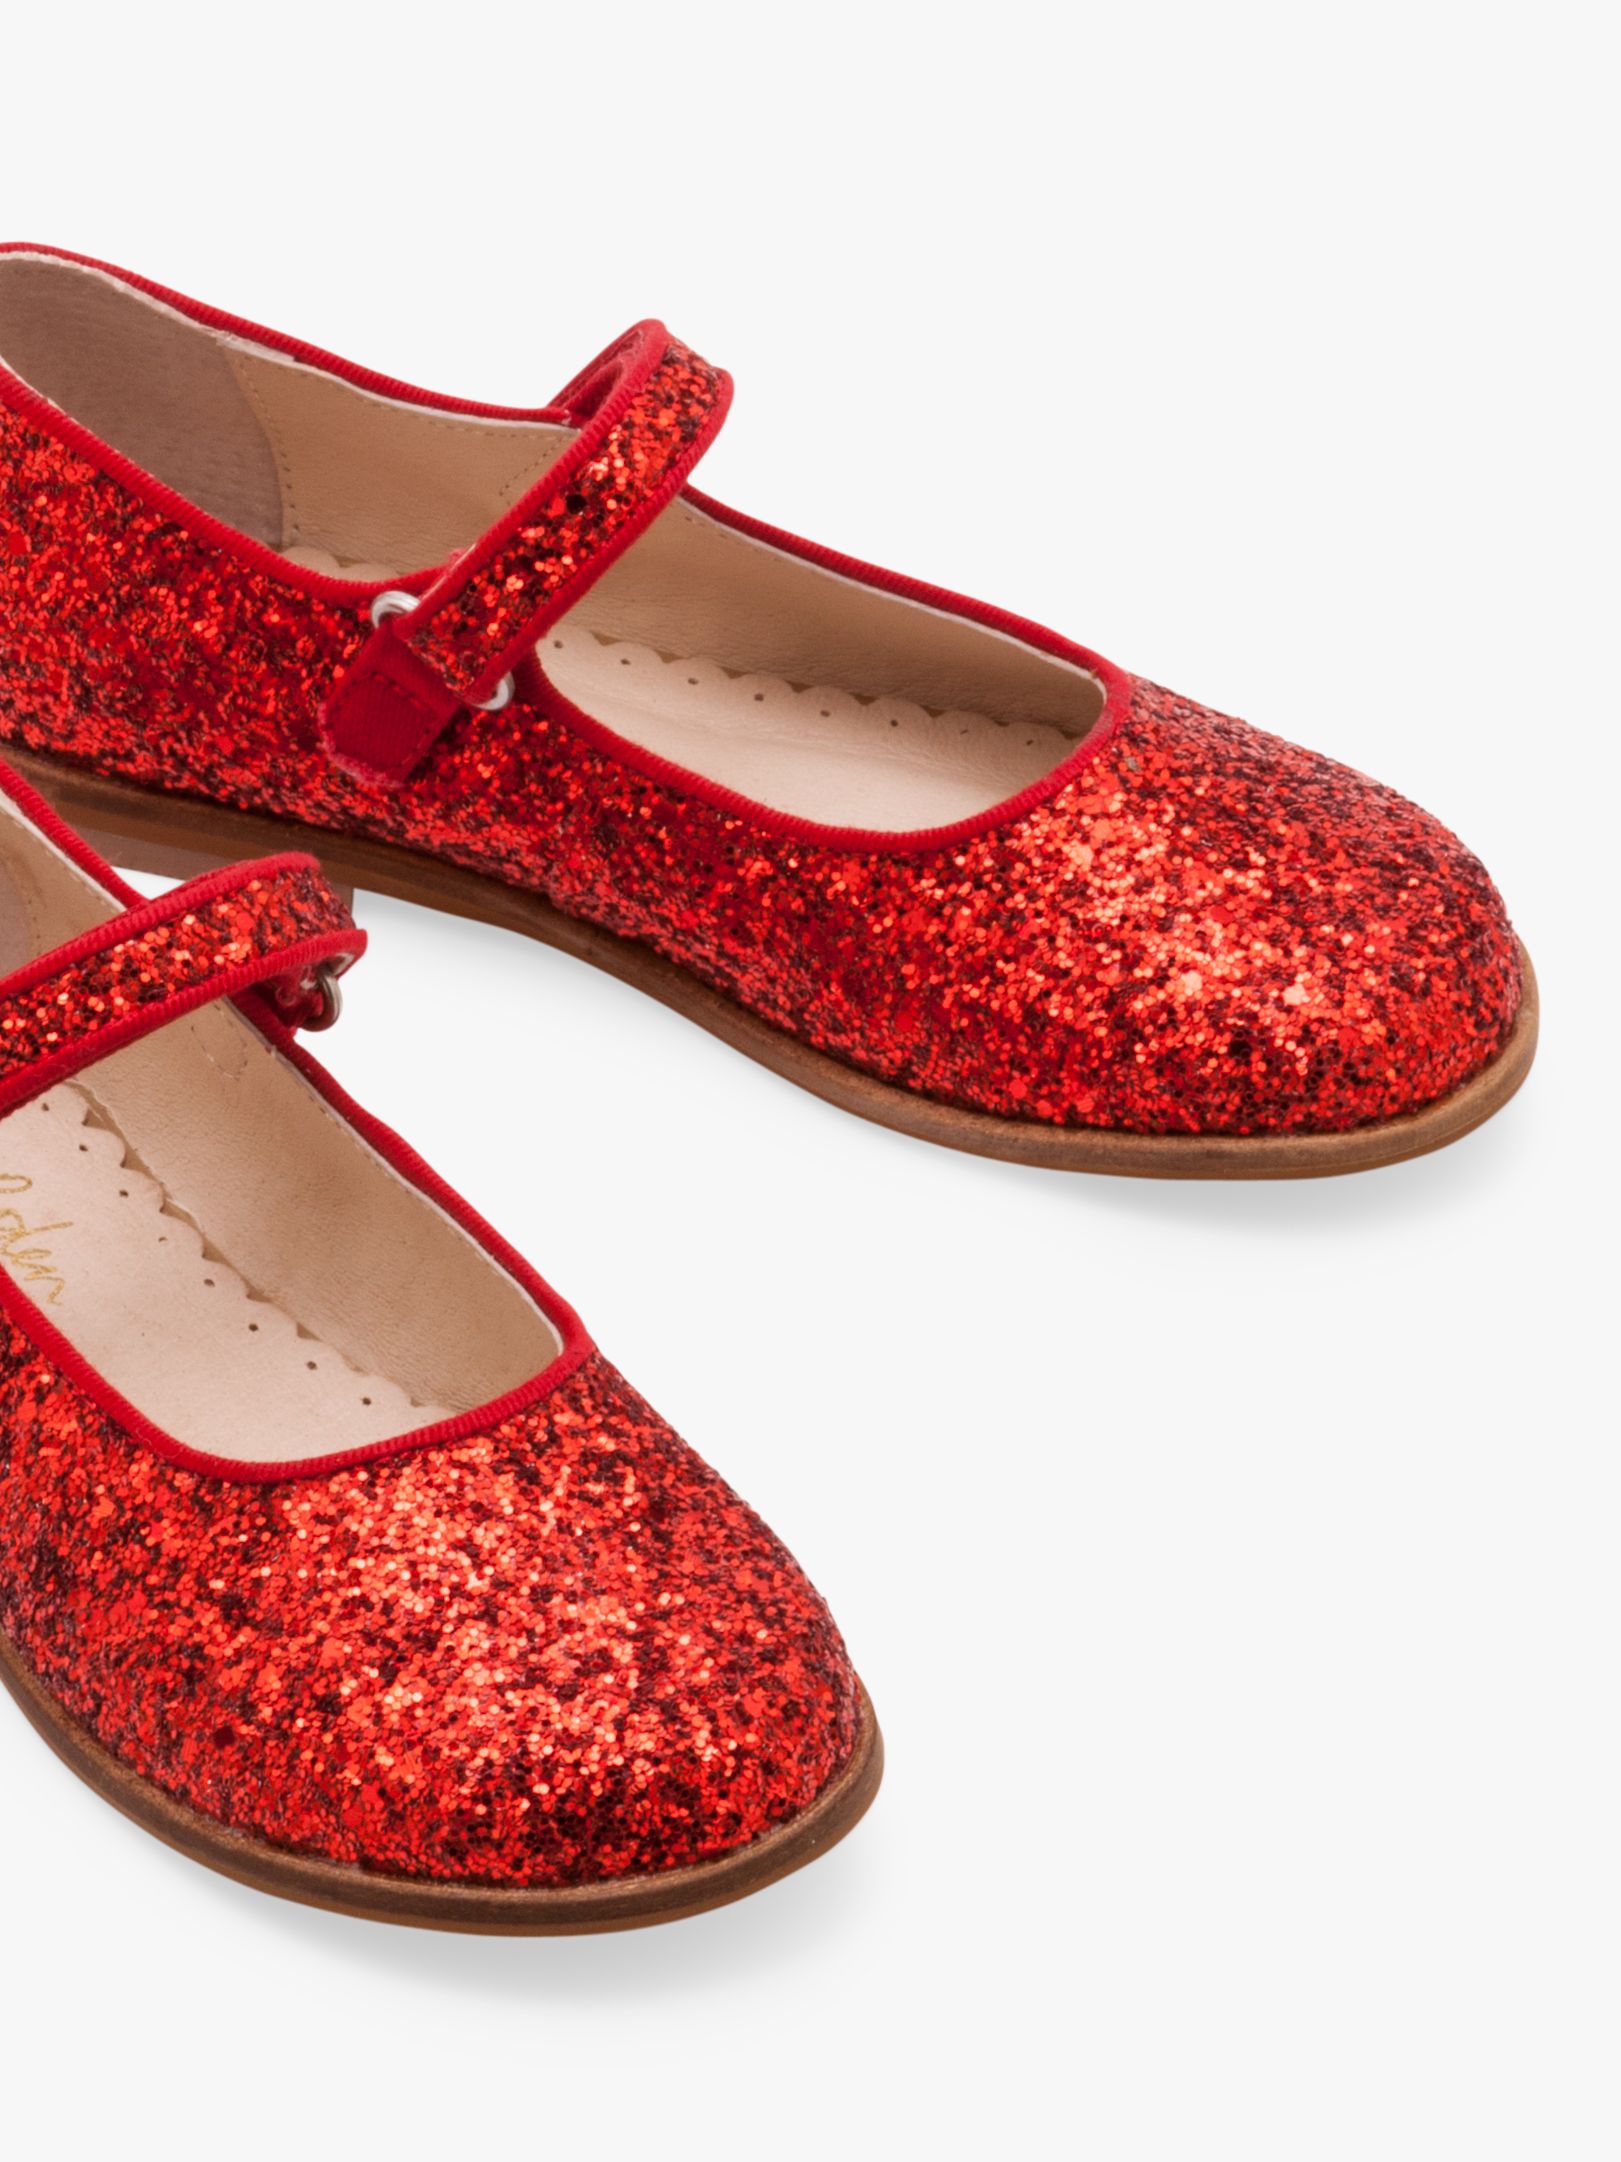 red sparkly shoes childrens